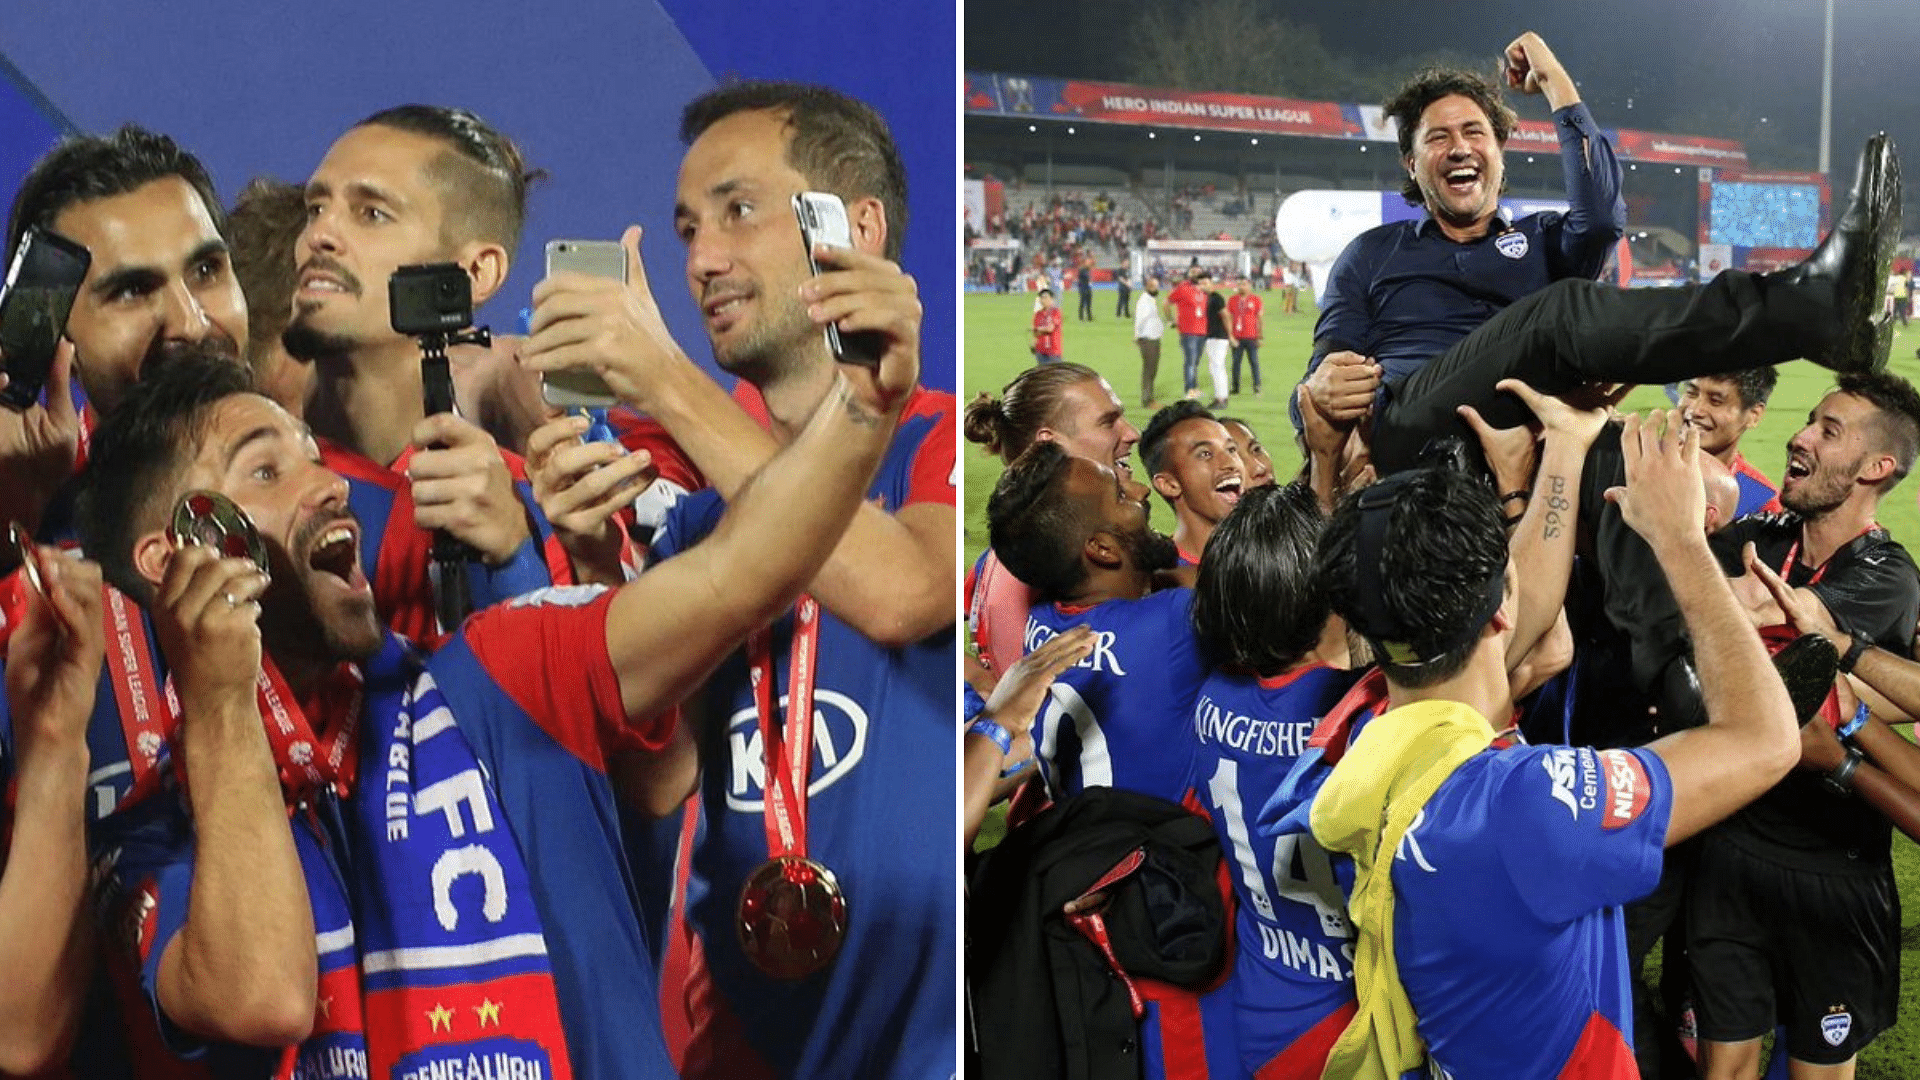 Bengaluru FC celebrate after being crowned ISL champions for the first time following an extra time win over FC Goa in the 2018/19 final at Mumbai.